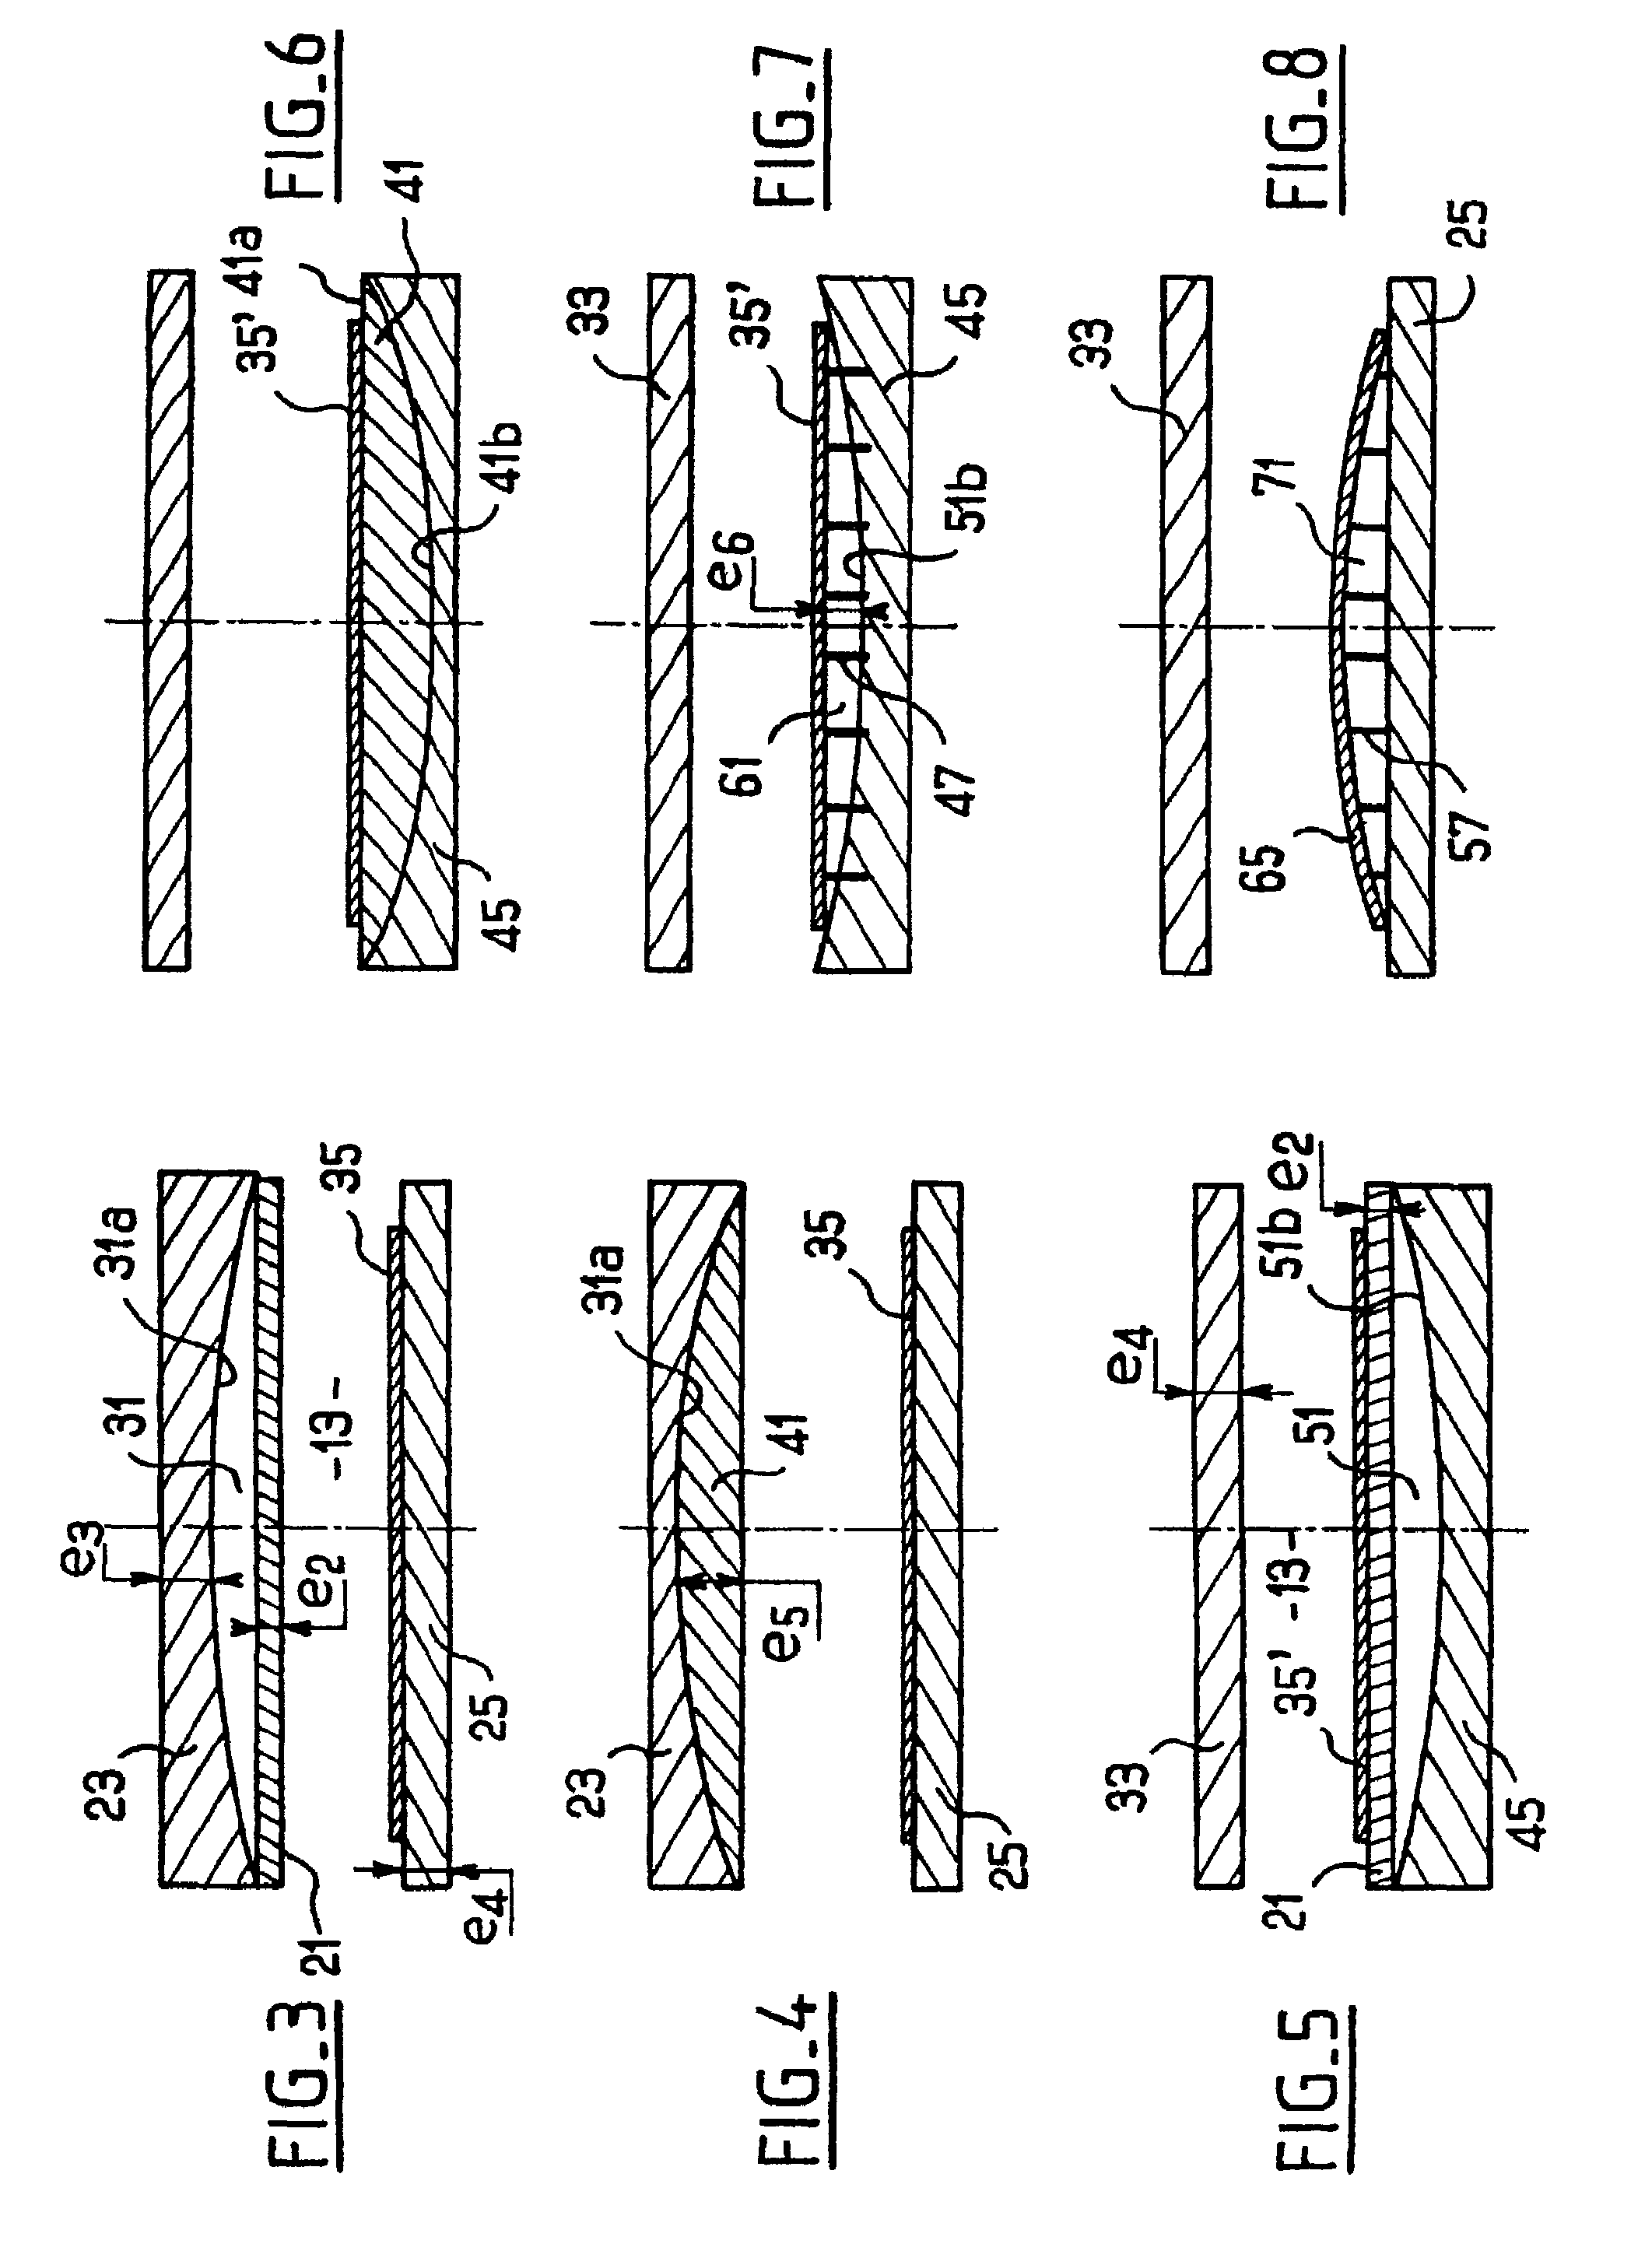 Plasma reactor for the treatment of large size substrates